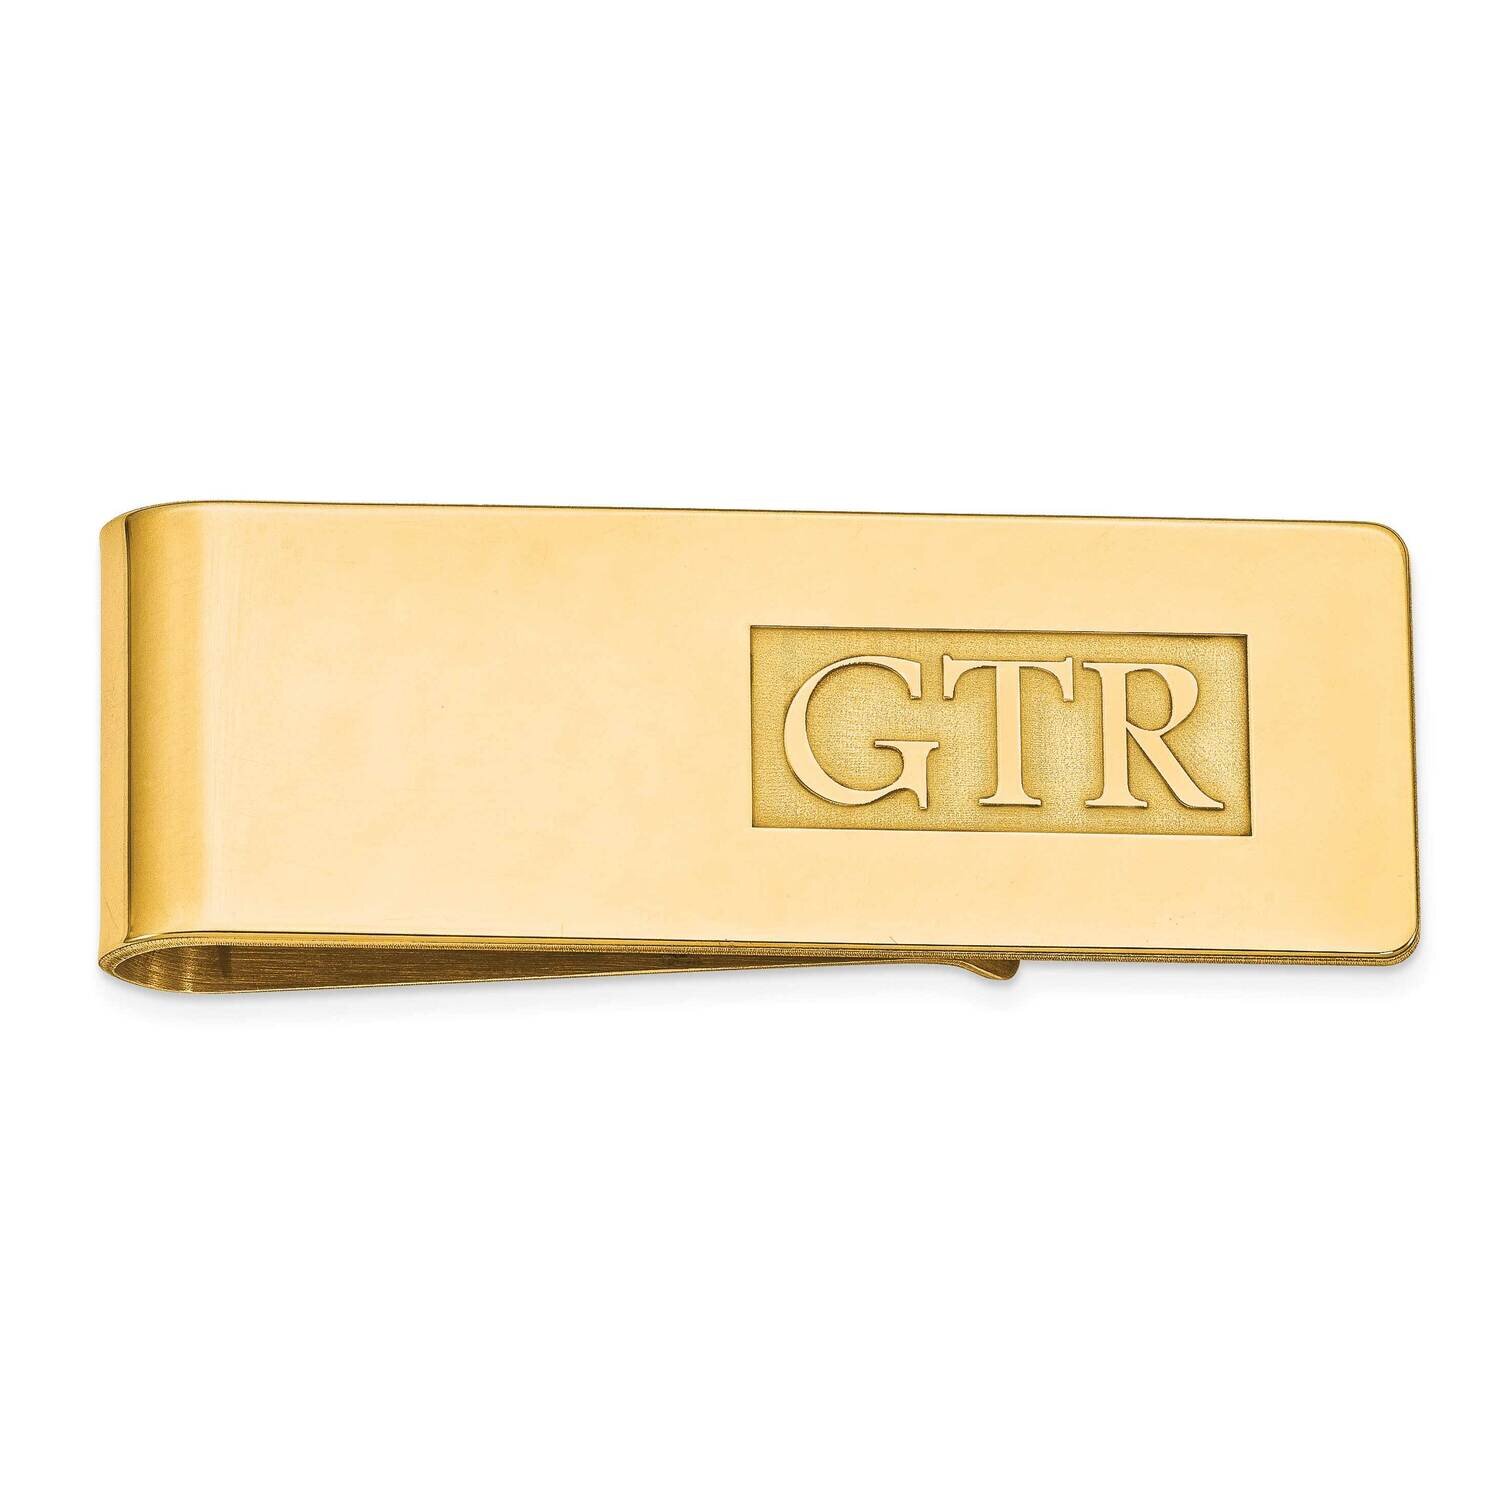 Raised Letters Polished Monogram Money Clip Gold-plated Silver XNA607GP